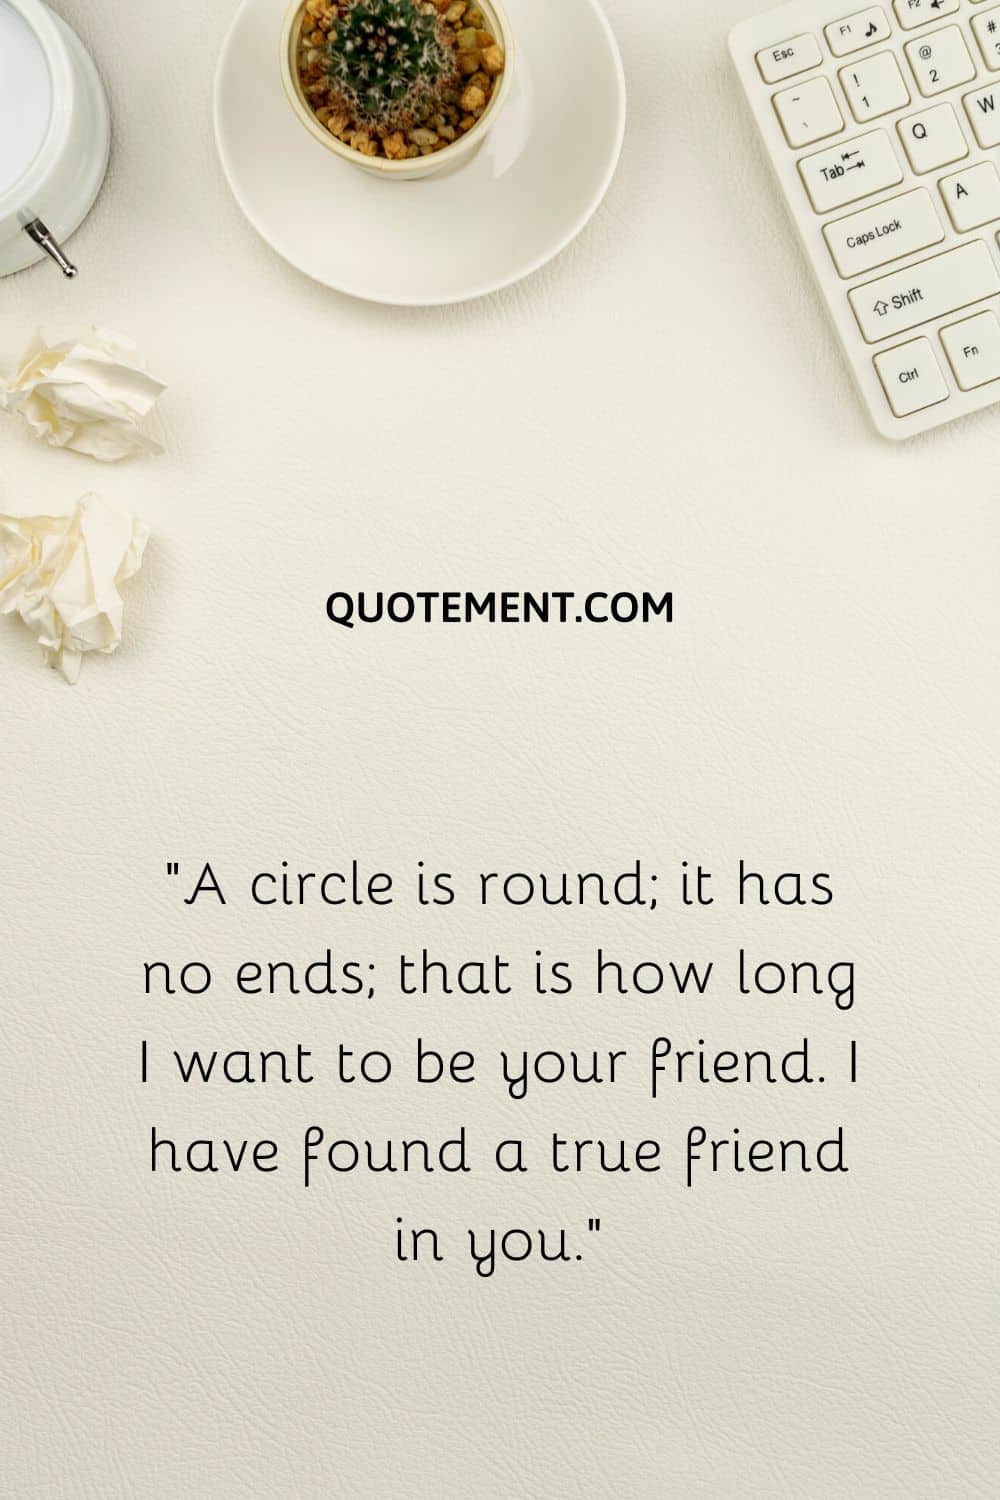 “A circle is round; it has no ends; that is how long I want to be your friend. I have found a true friend in you.”